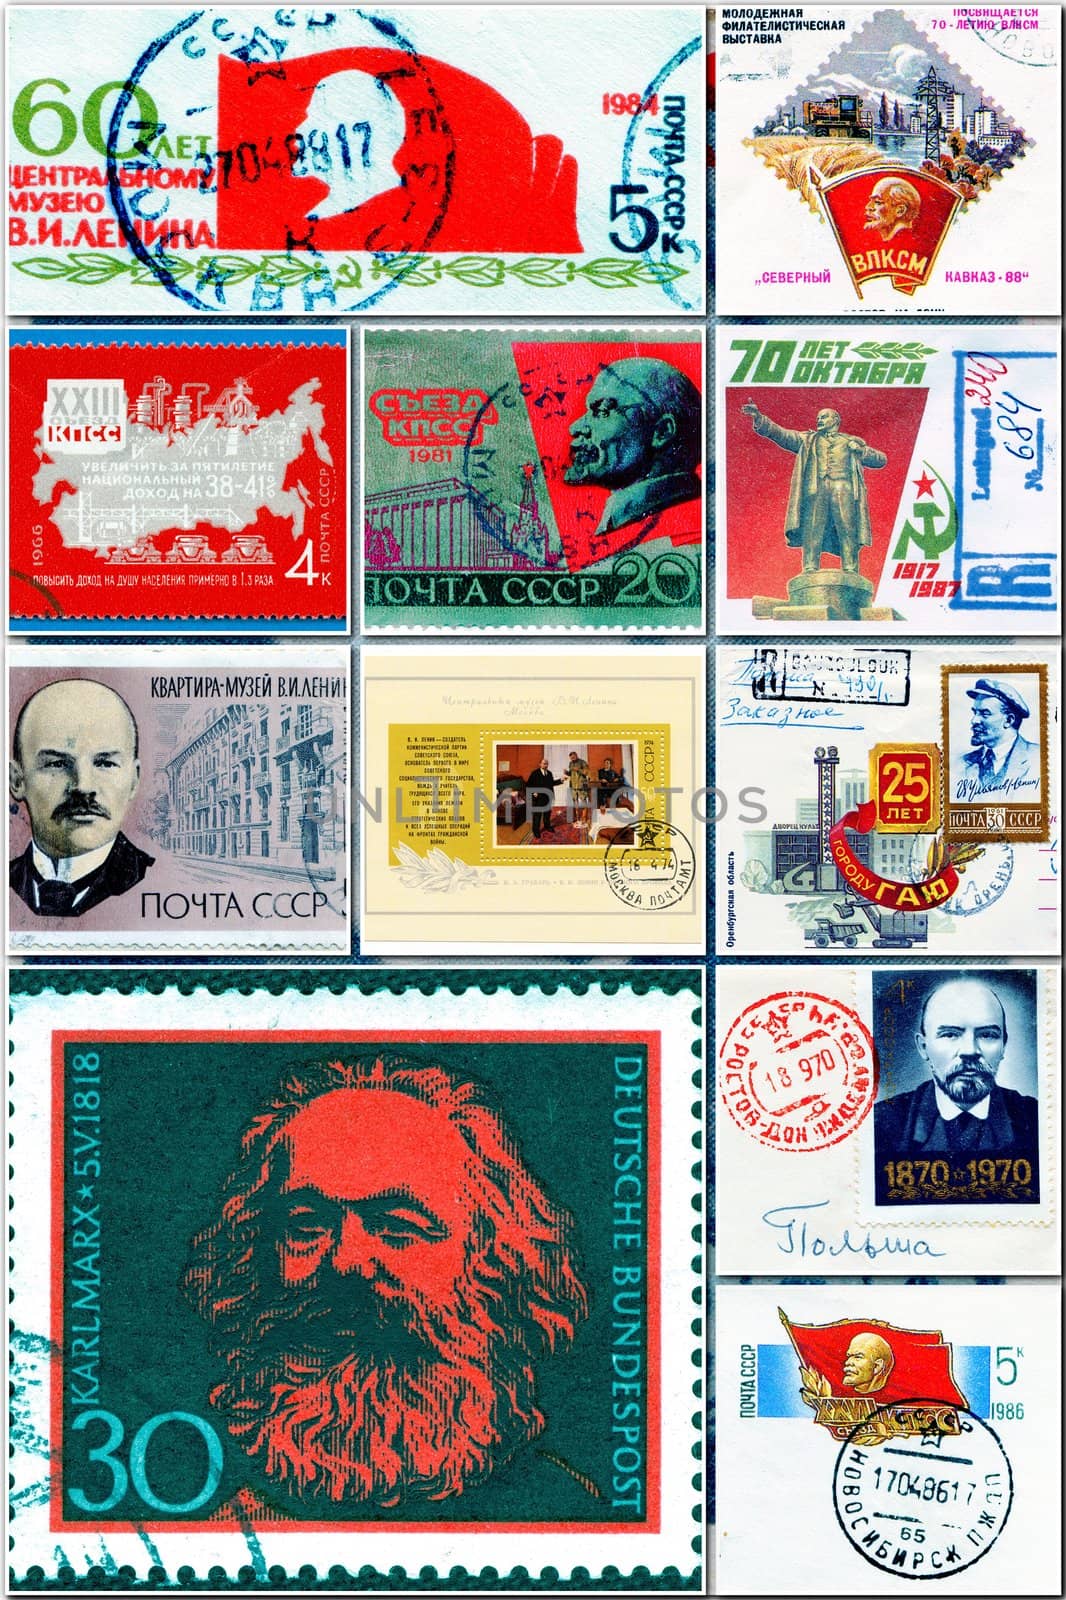 communists collage by andromeda13